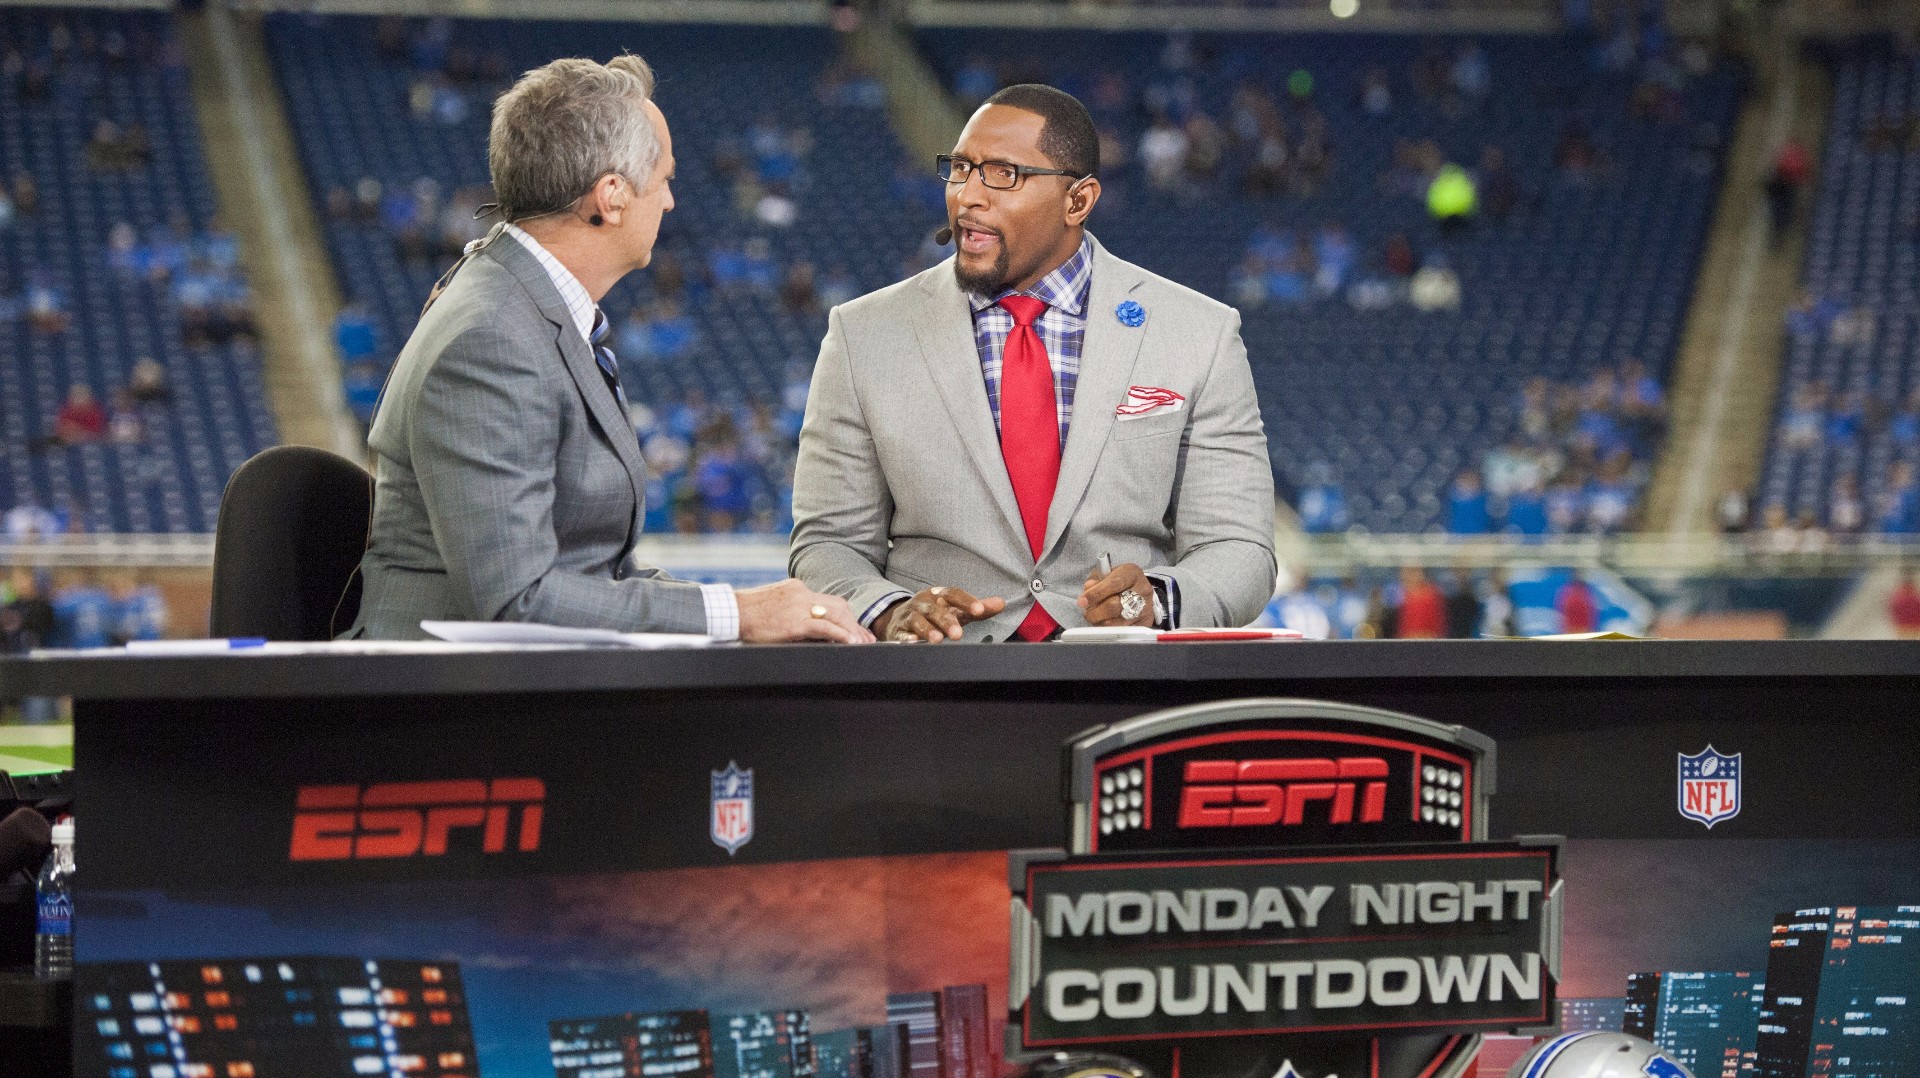 ESPN to do 'Countdown' in Mexico City before Texans-Raiders